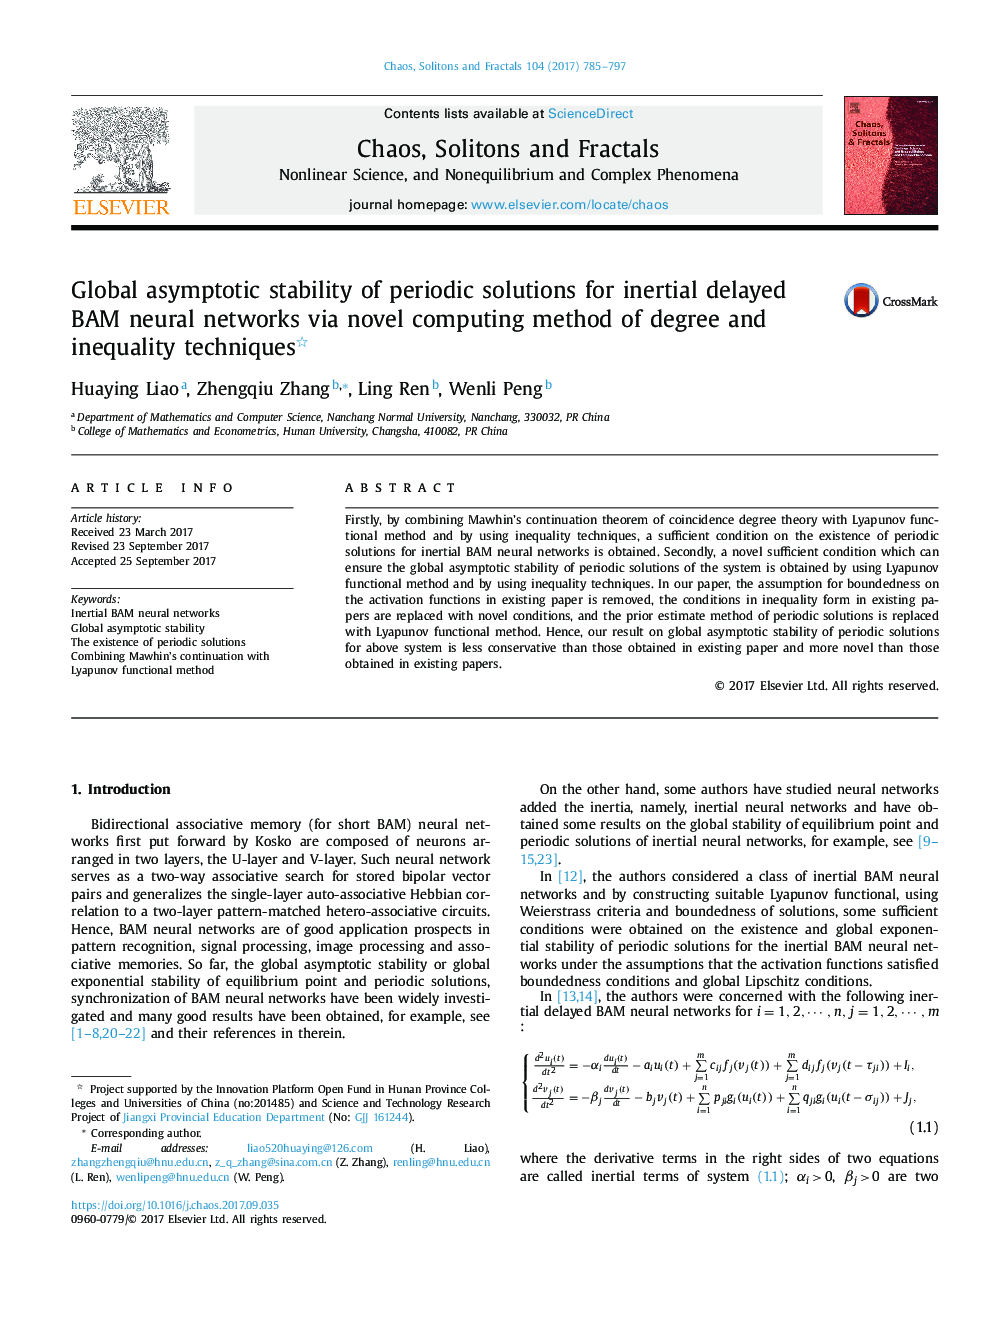 Global asymptotic stability of periodic solutions for inertial delayed BAM neural networks via novel computing method of degree and inequality techniques